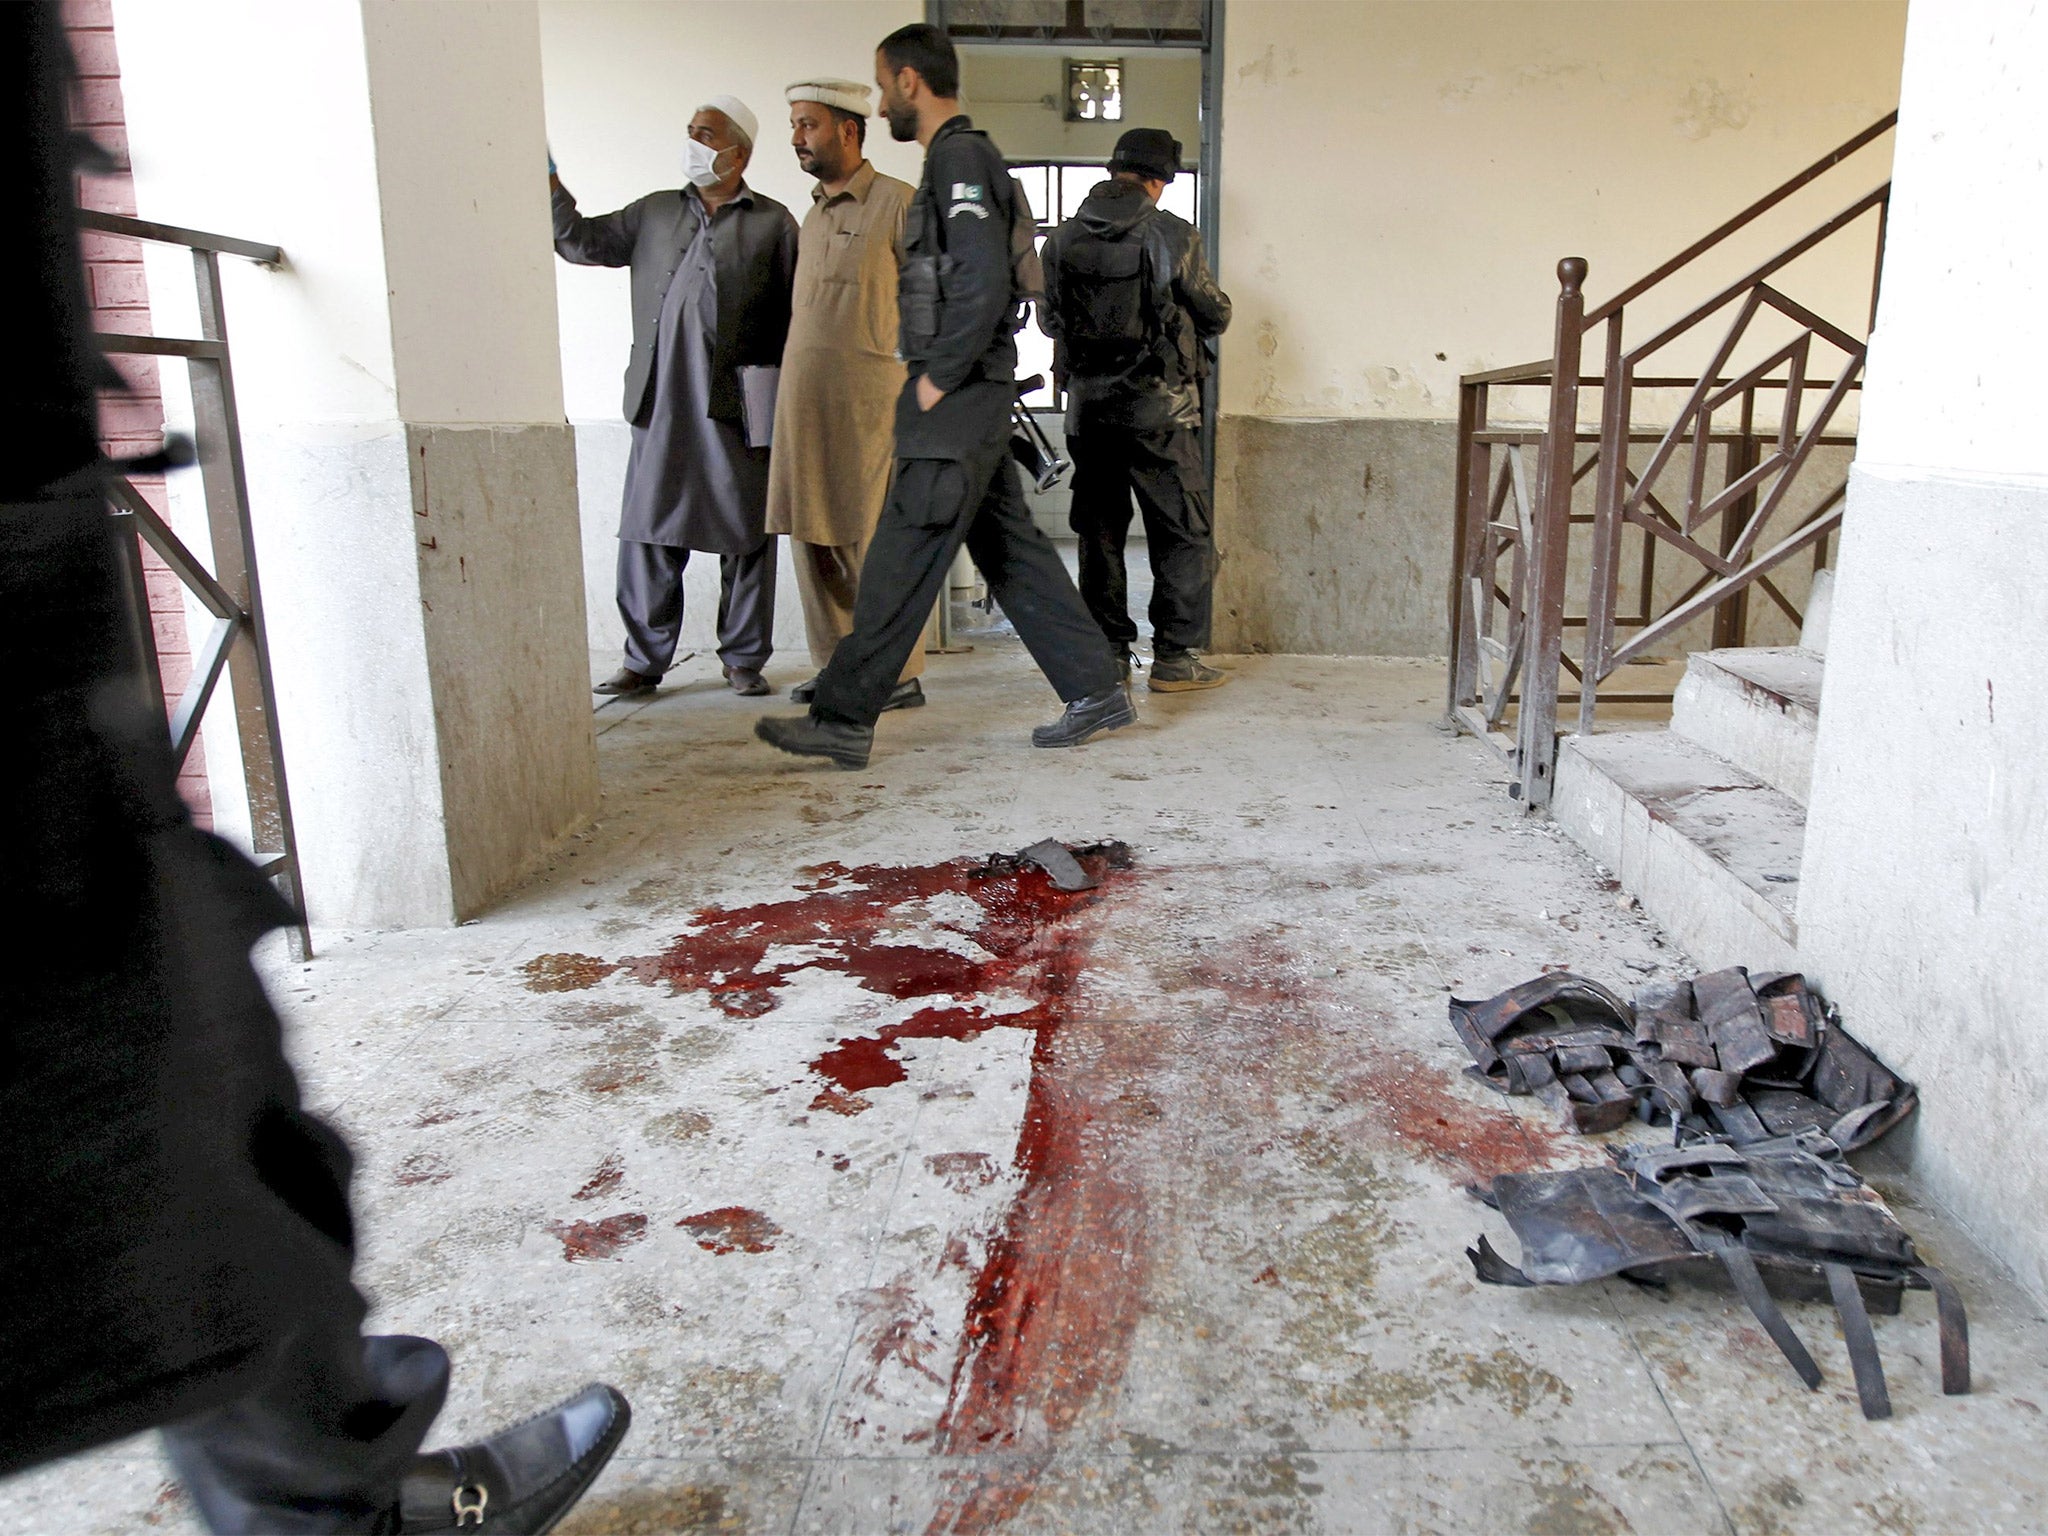 Blood stains and flak jackets used by attackers remain in the hallway of a dormitory where the attack took place